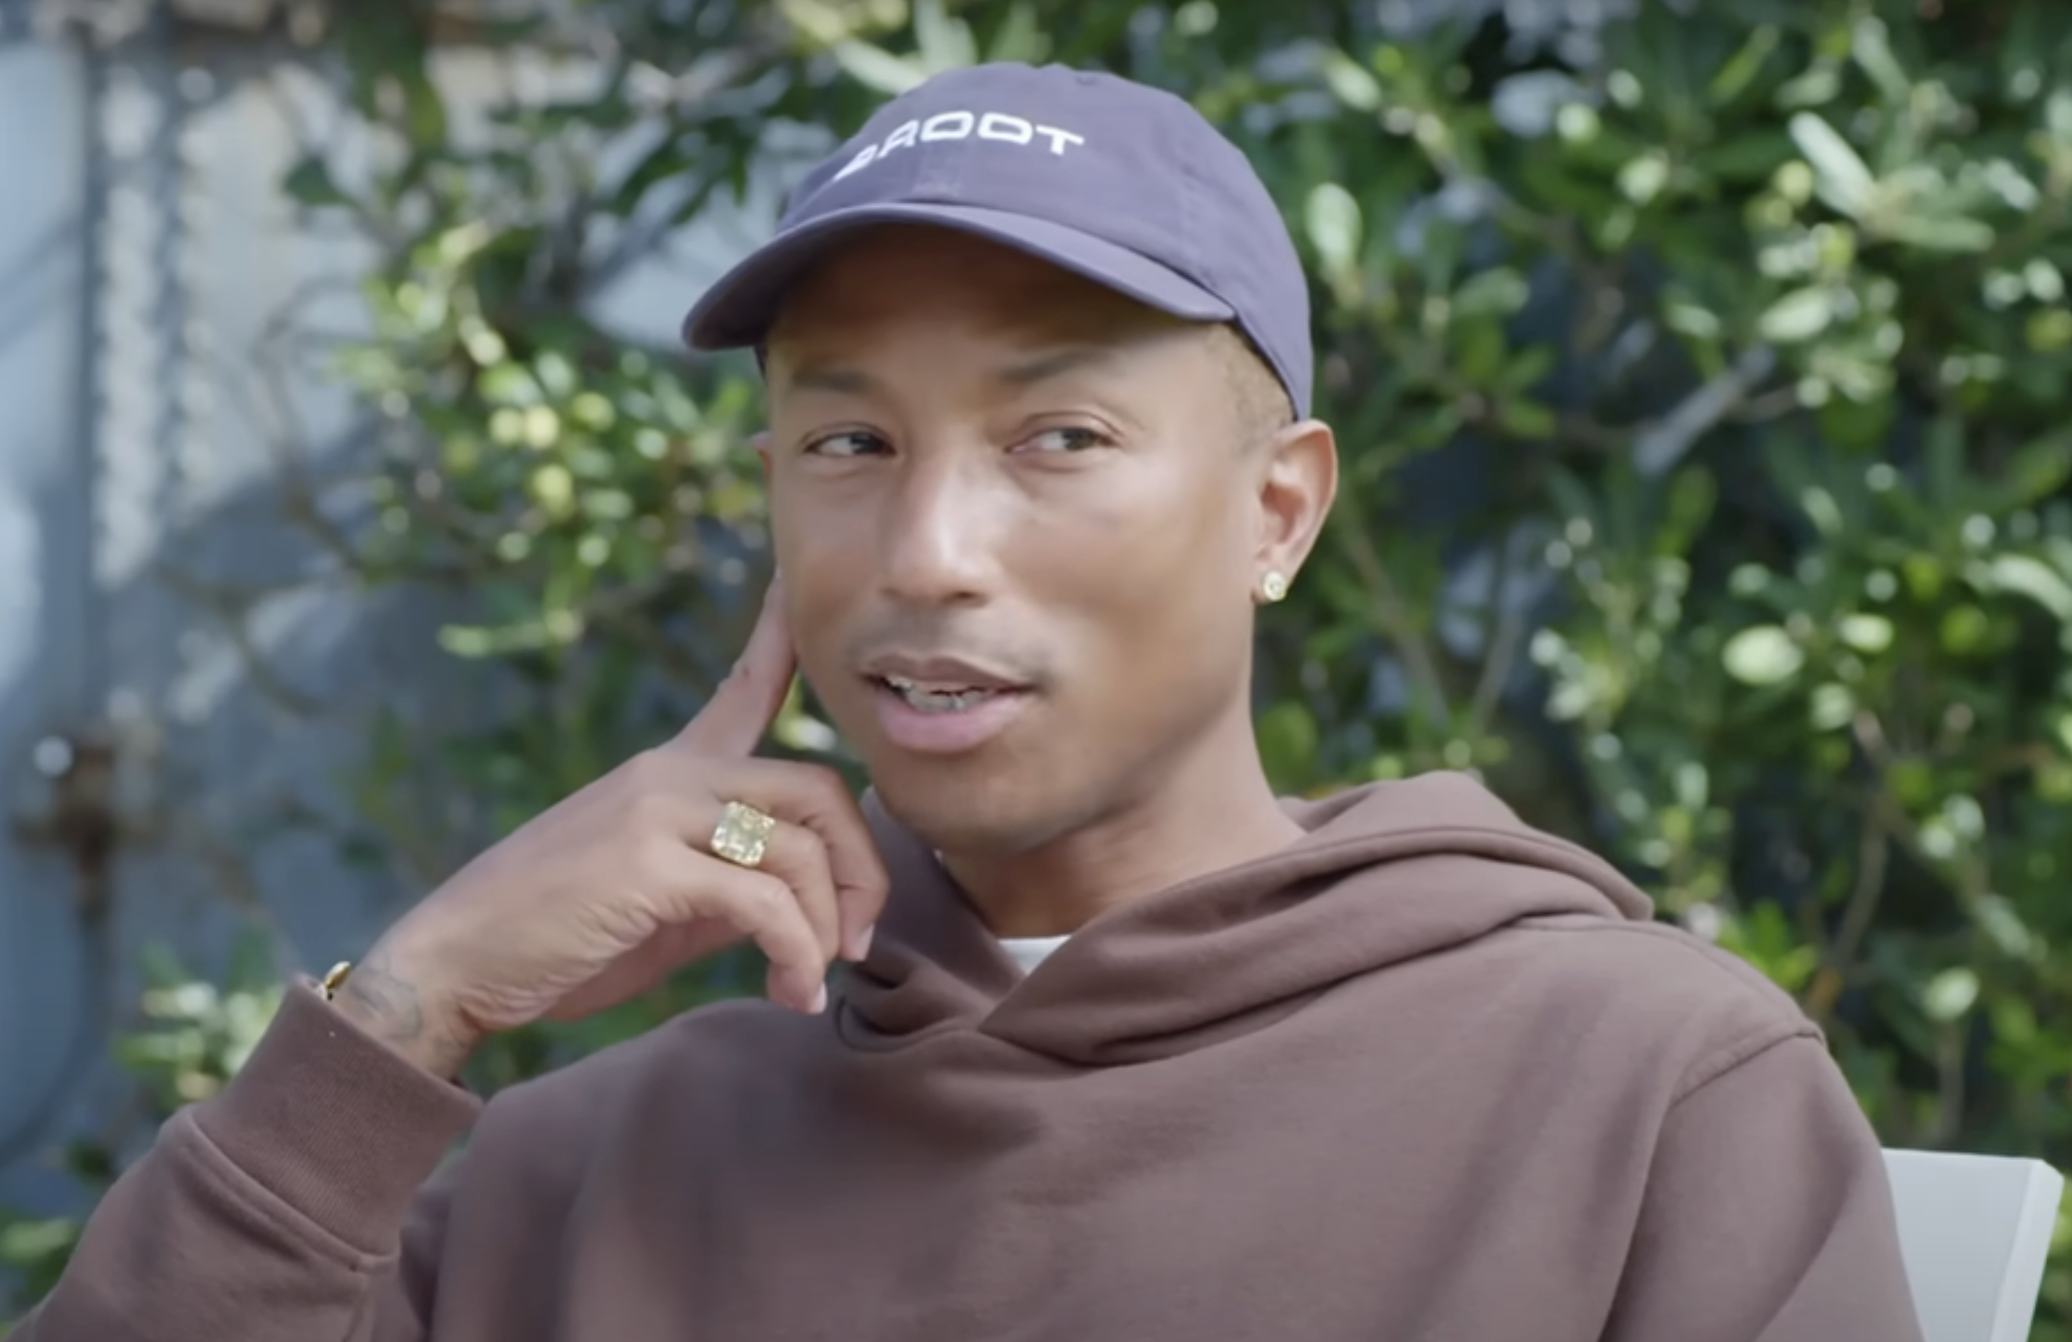 Pharrell Williams in a casual hoodie and cap, seated outdoors, smiling slightly with hand on chin